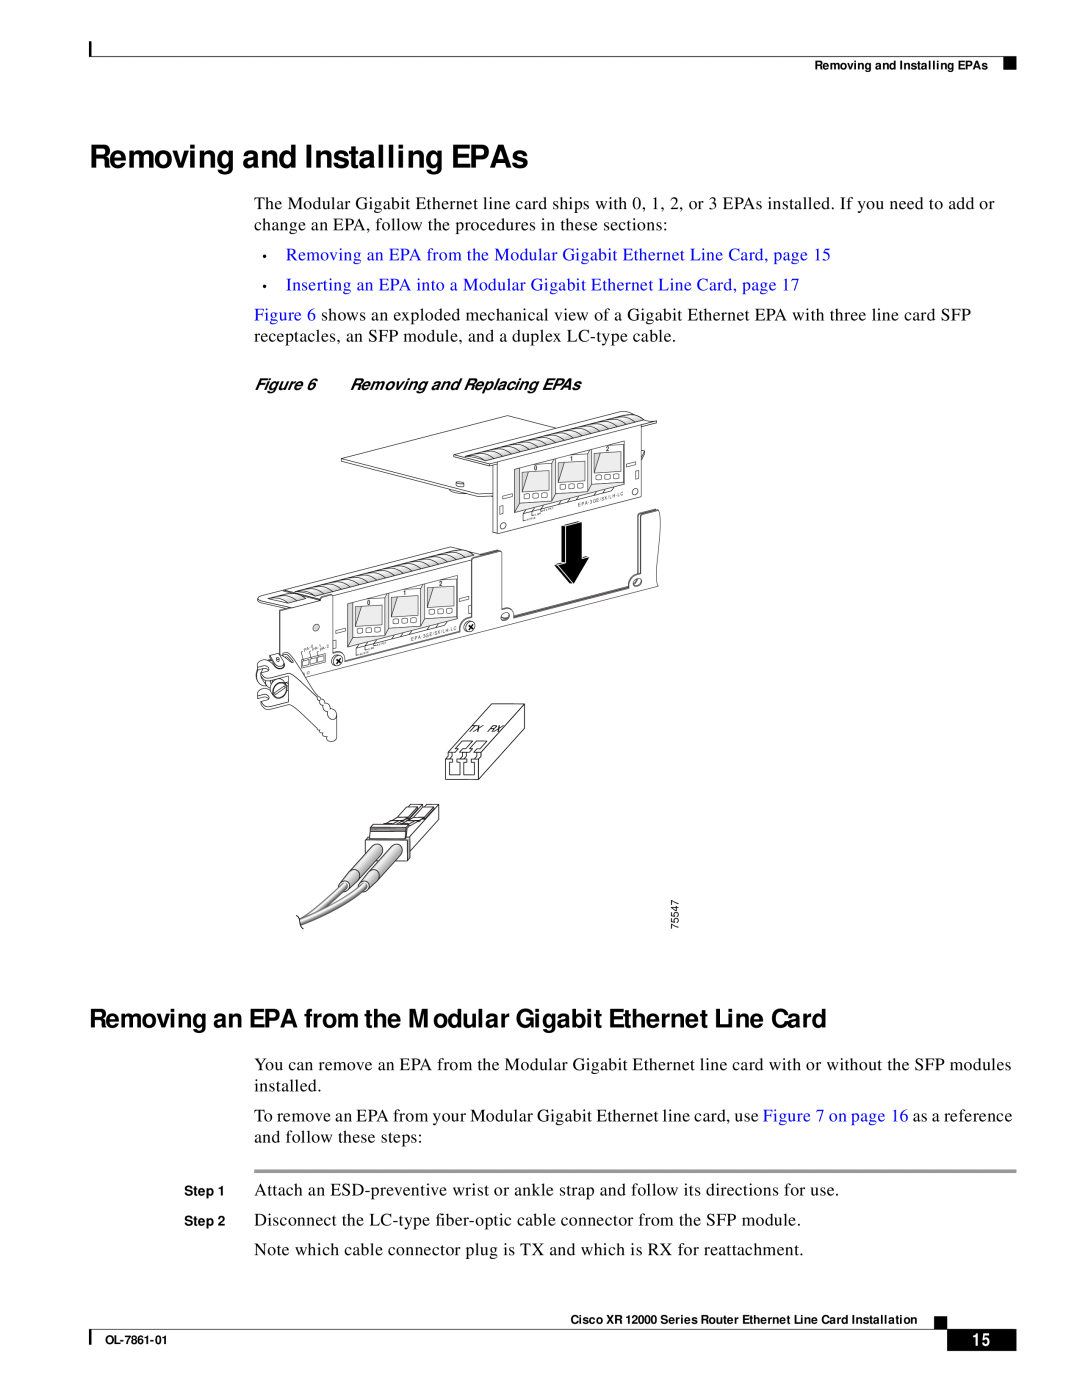 Cisco Systems OL-7861-01 manual Removing and Installing EPAs, Removing an EPA from the Modular Gigabit Ethernet Line Card 